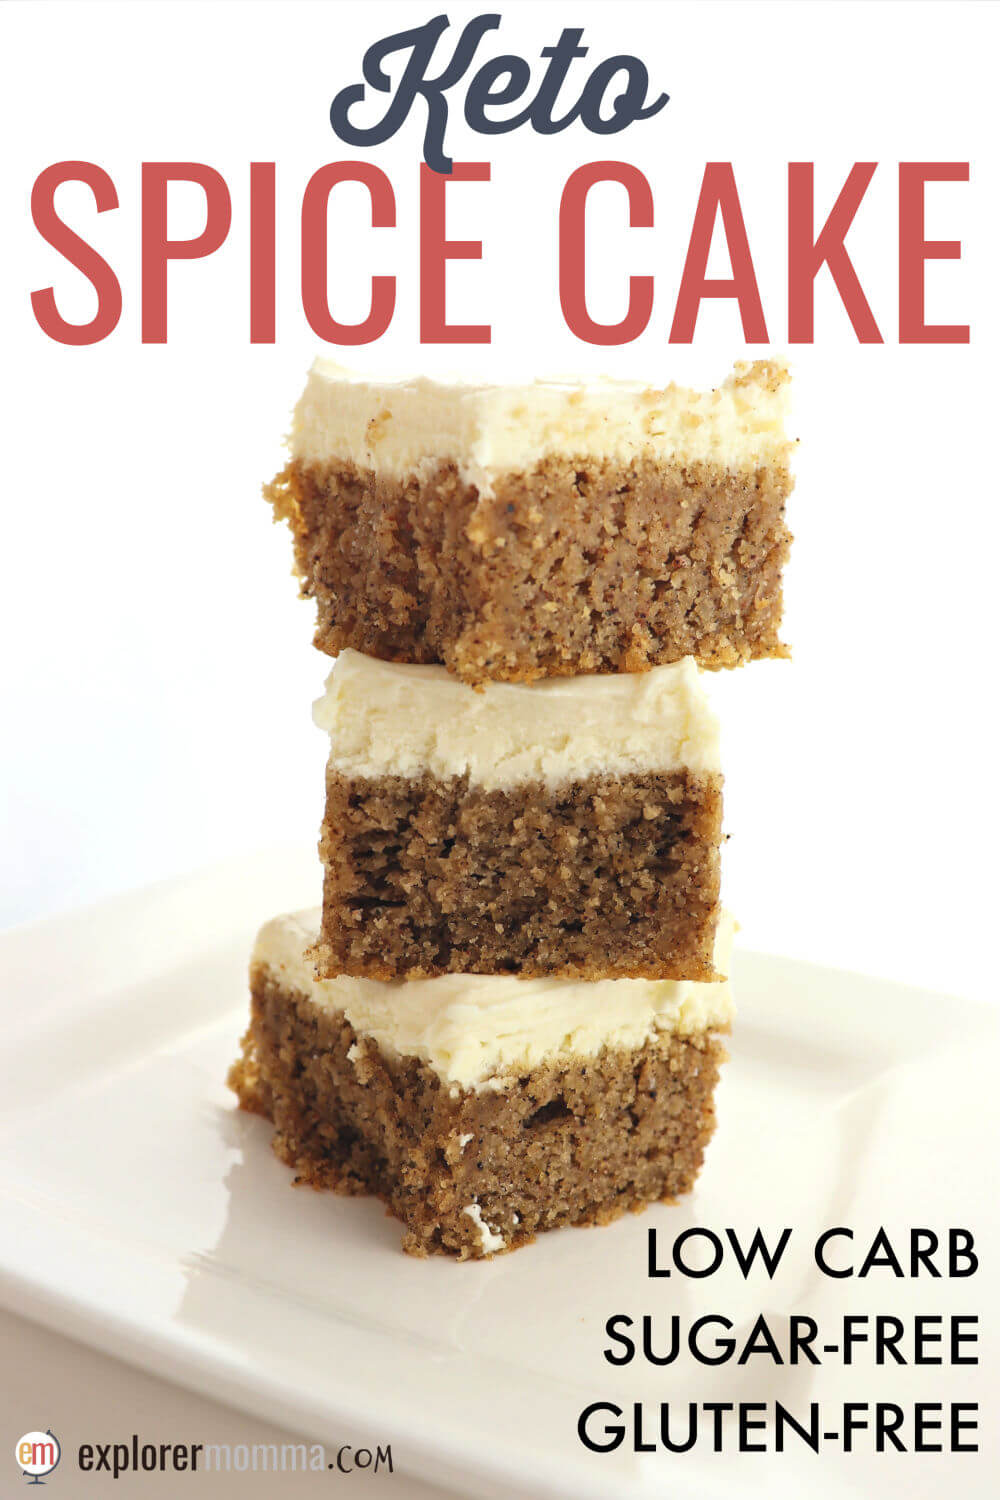 Low Carb Carrot Cake Recipe With Ginger Cream Cheese Frosting